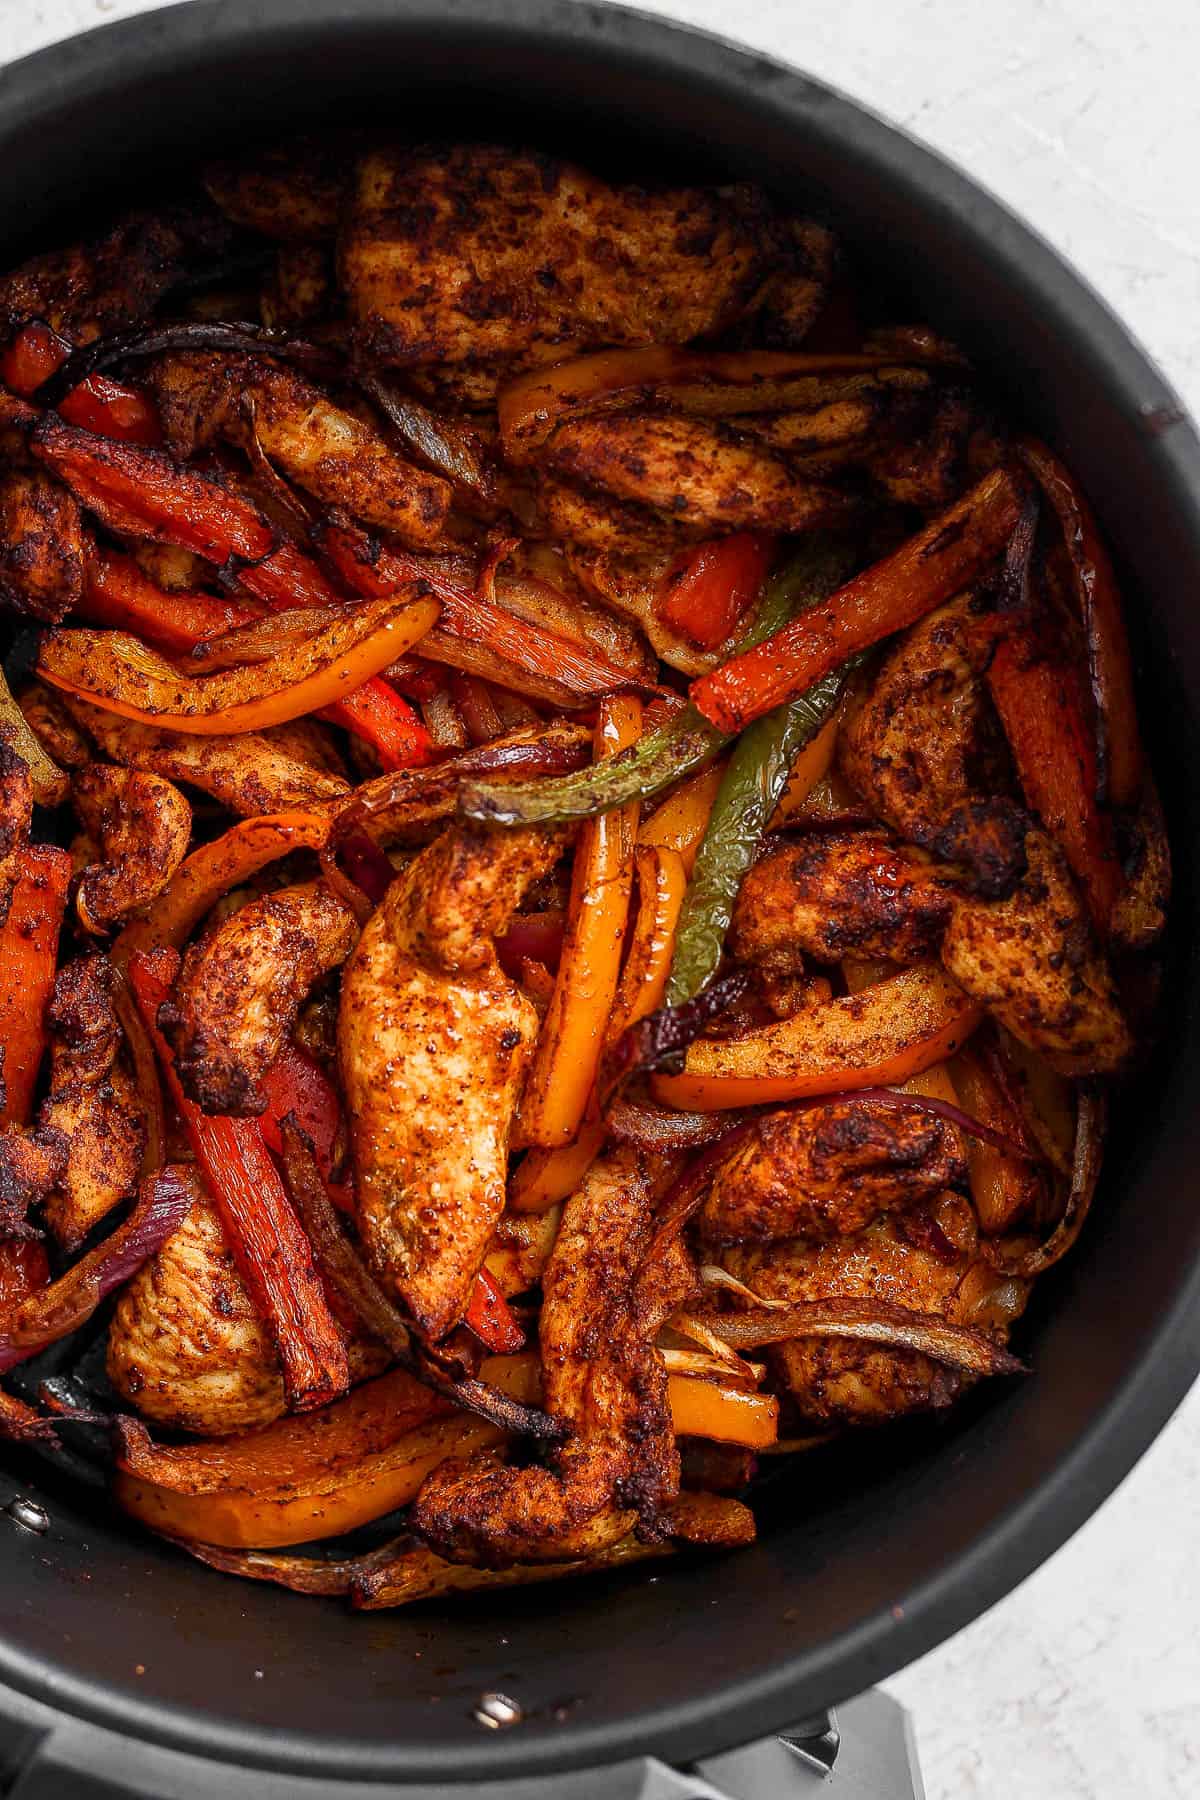 Cooked chicken fajitas in the air fryer bowl